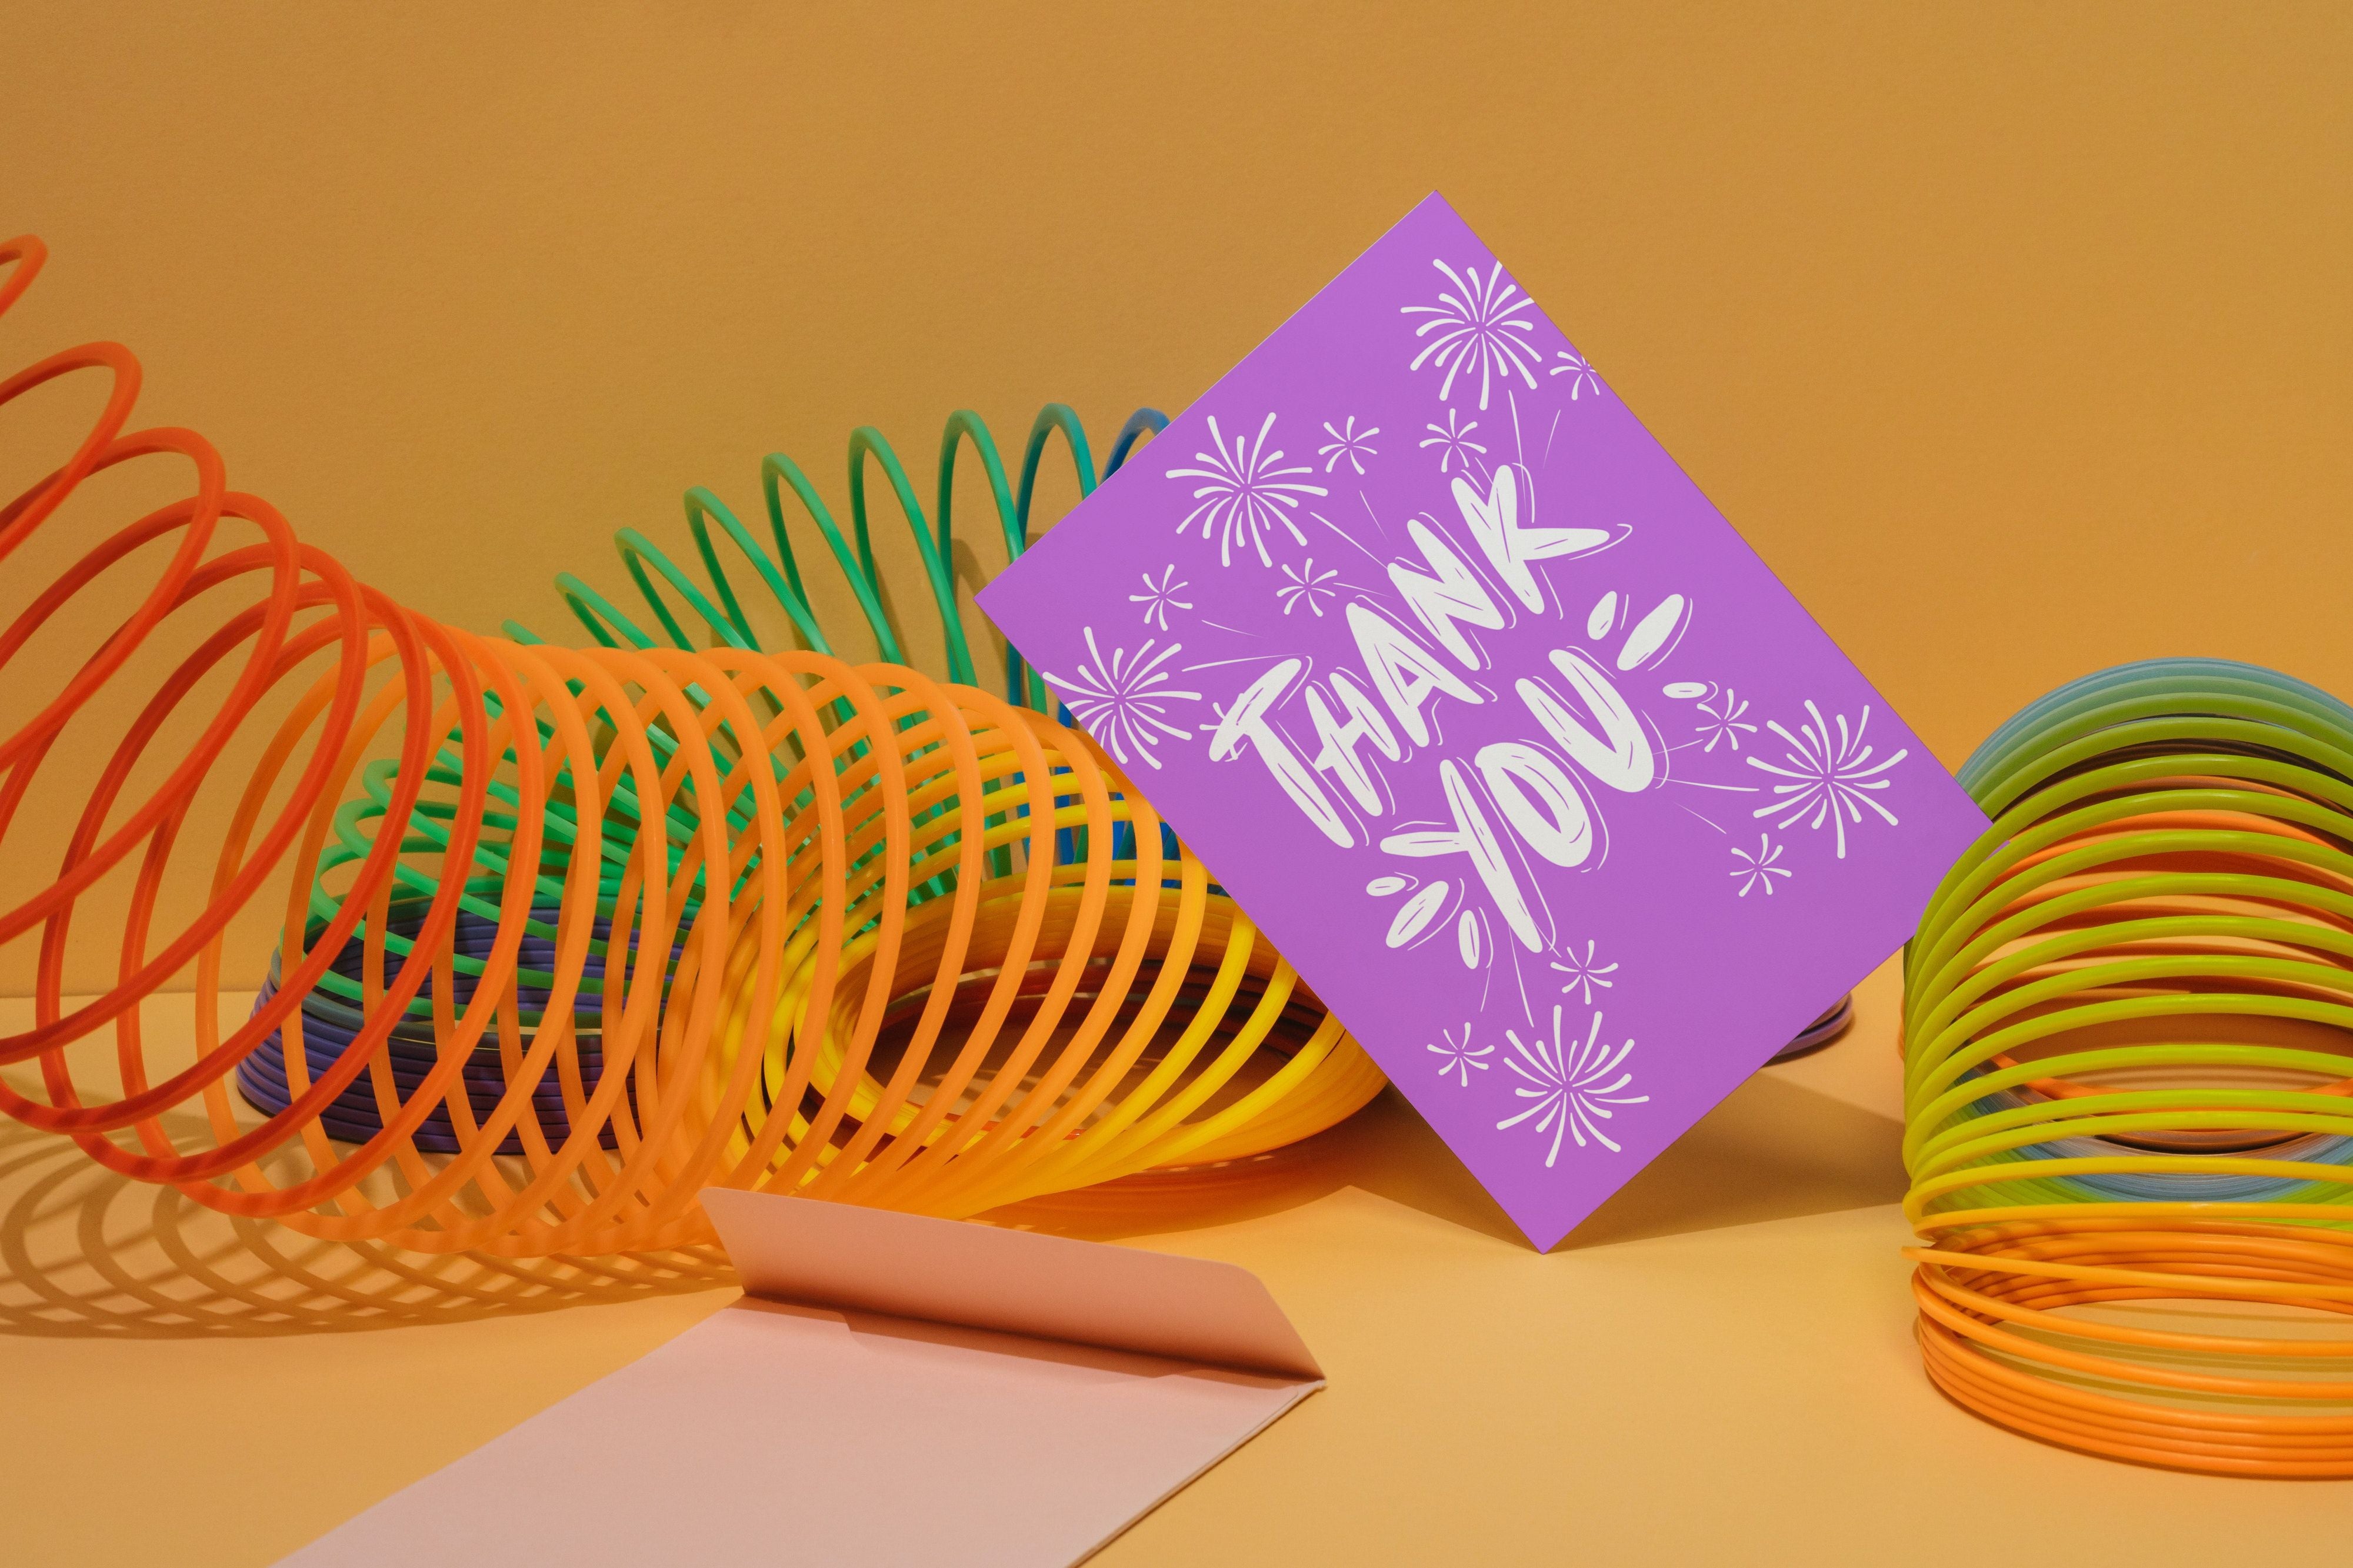 Purple card saying Thank you with fireworks leaning on rainbow colored slinky.